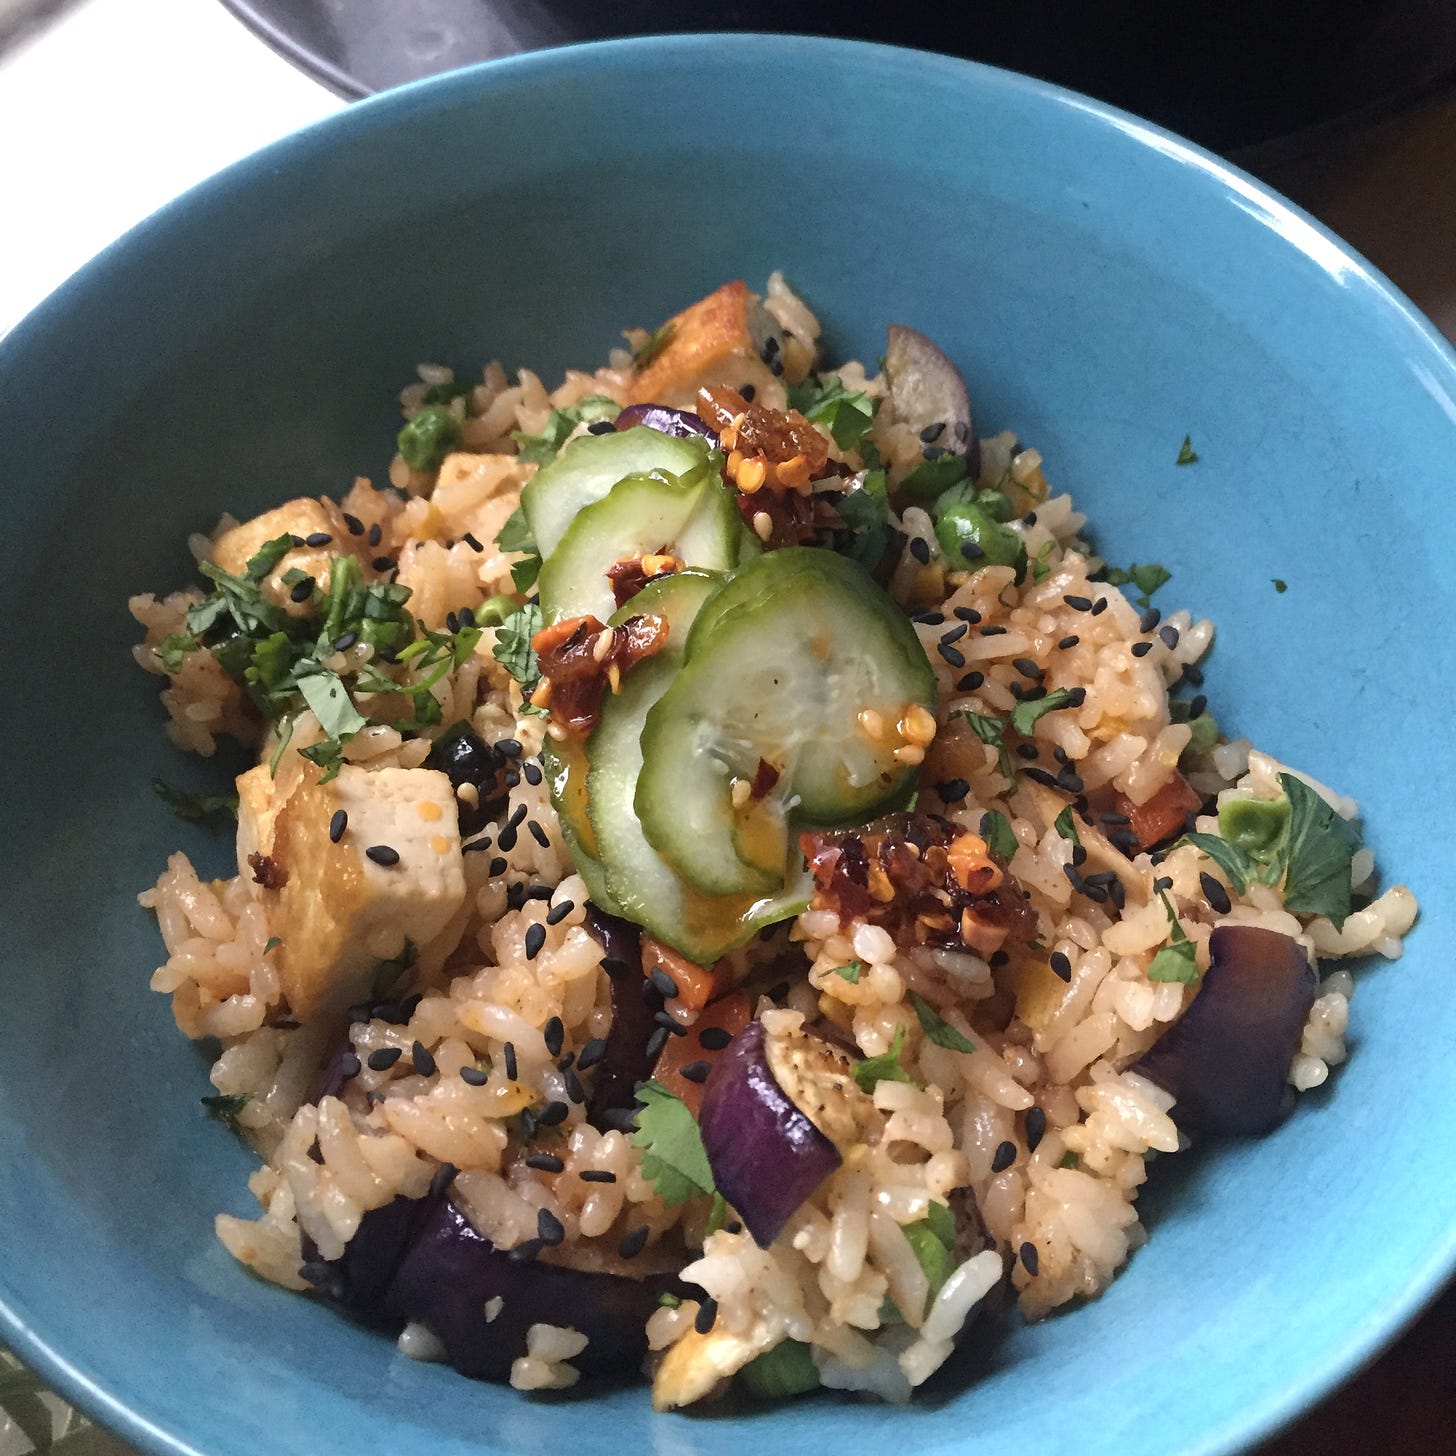 A blue bowl filled with fried rice, with slices of eggplant and cubes of fried tofu visible. On top are thin slices of quick pickled cucumber, black sesame seeds, and chili crisp.